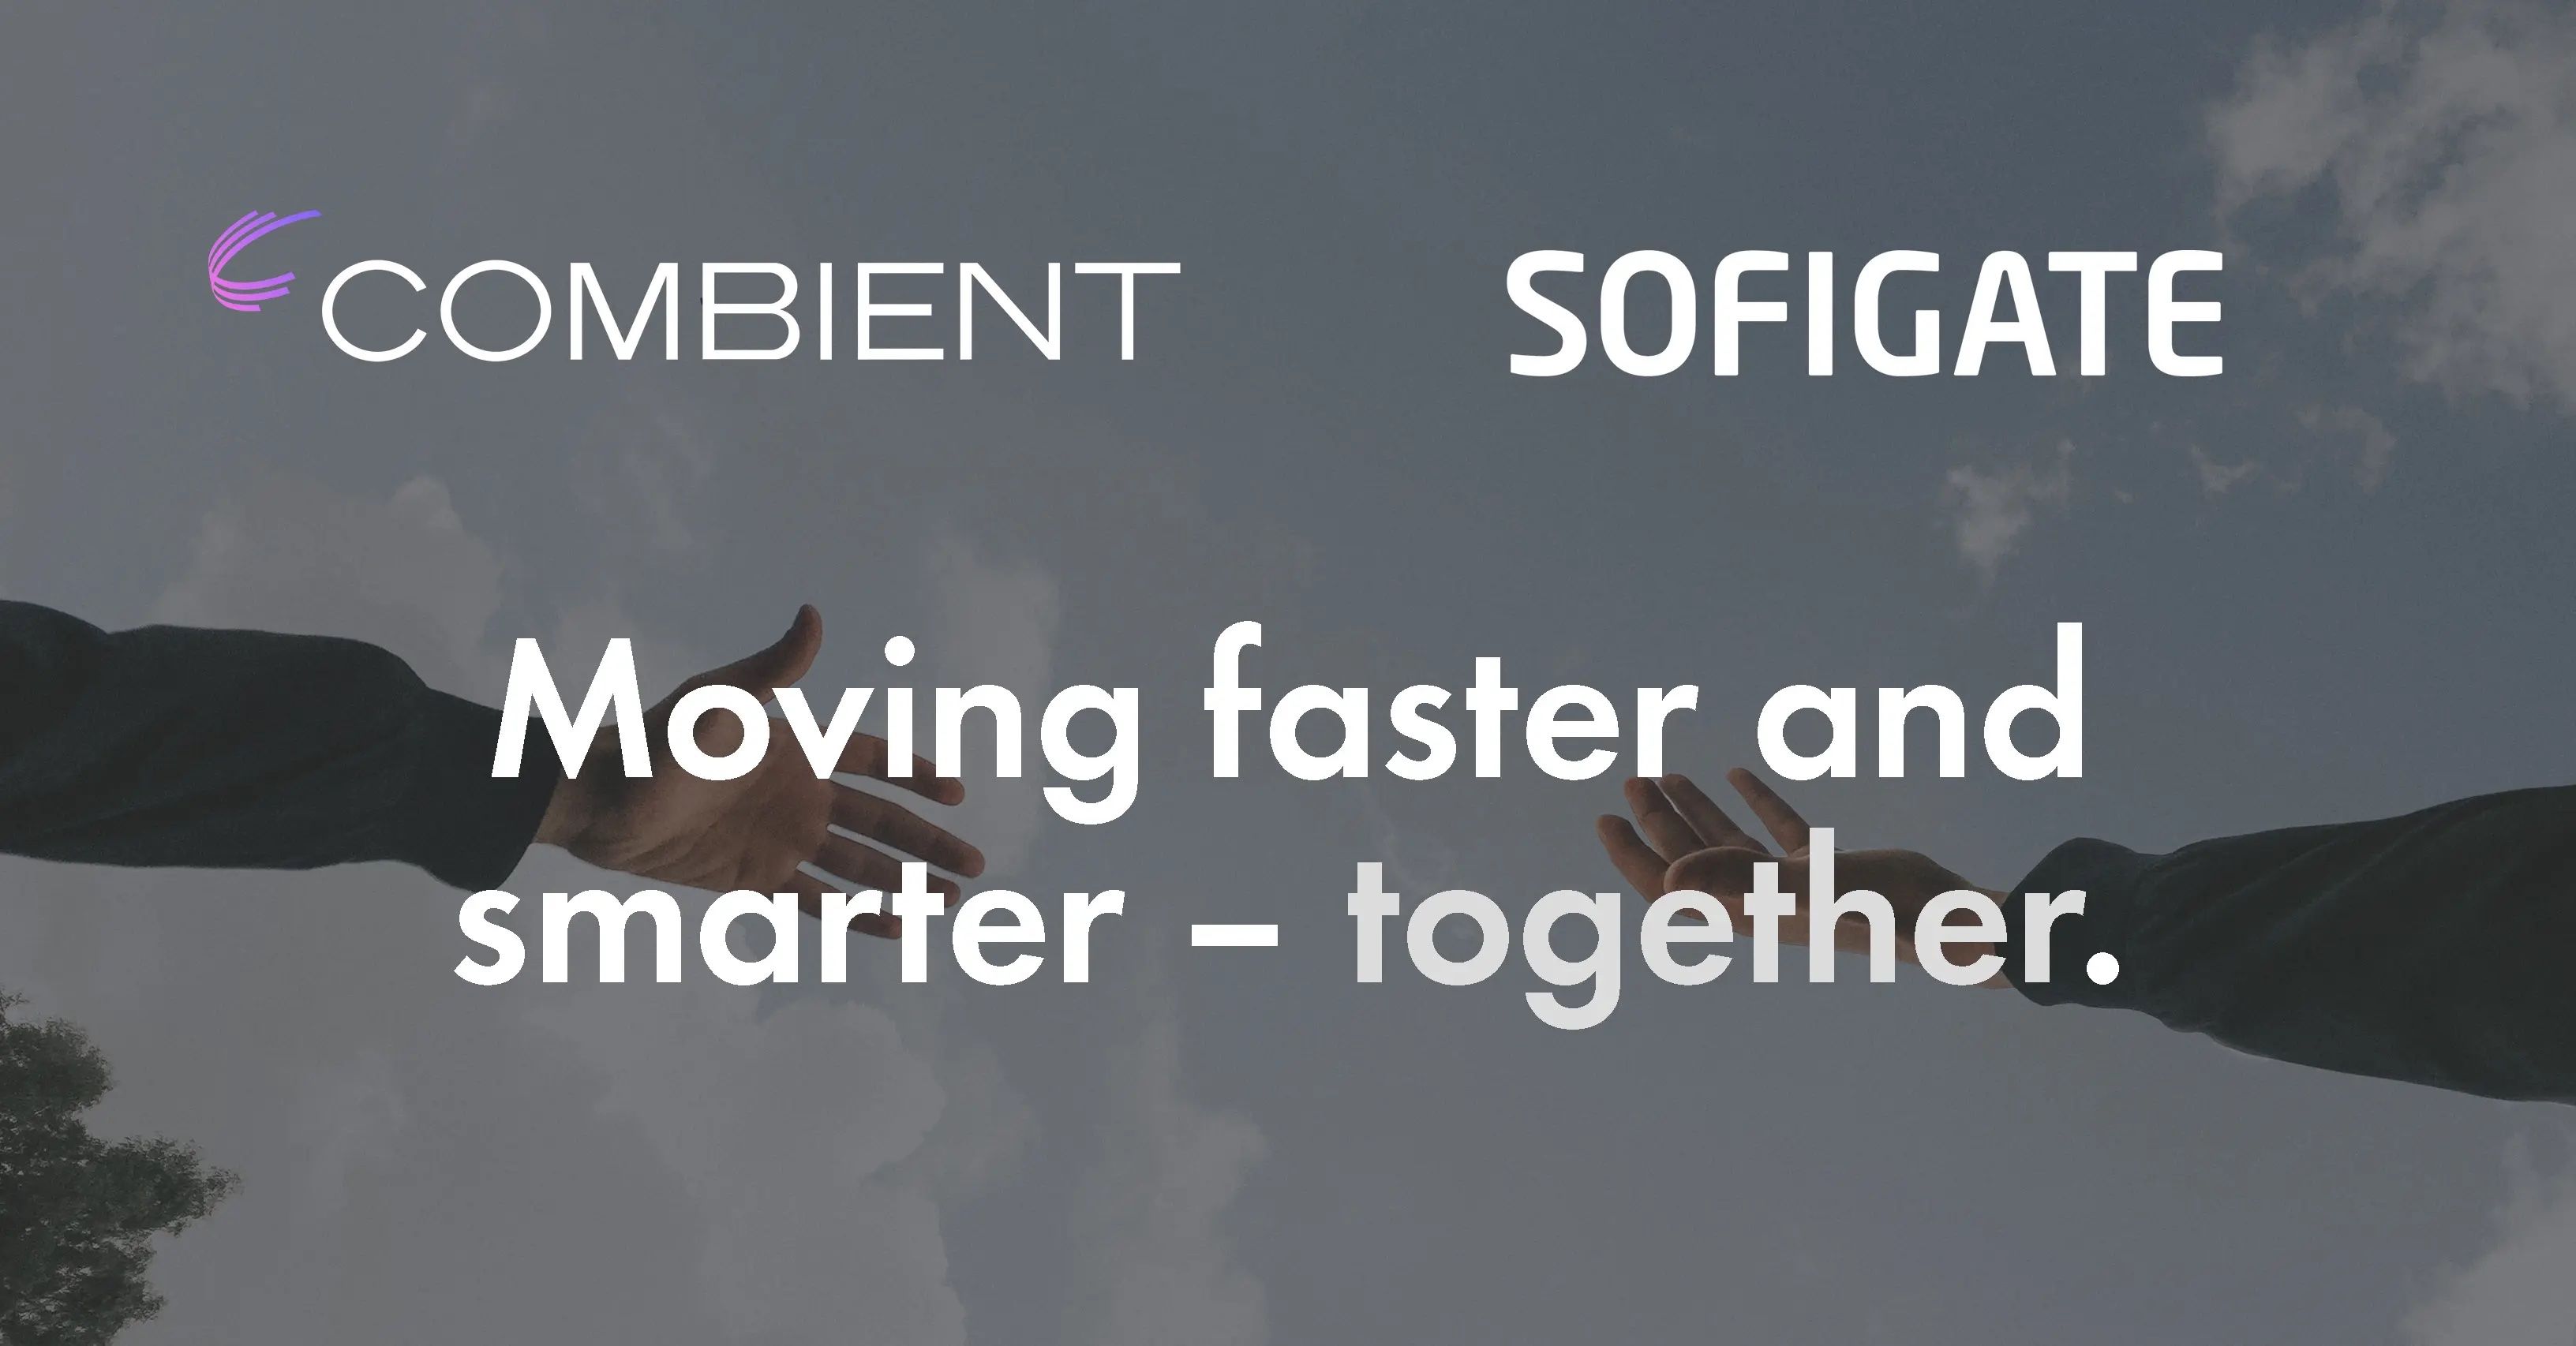 Moving faster and smarter - together